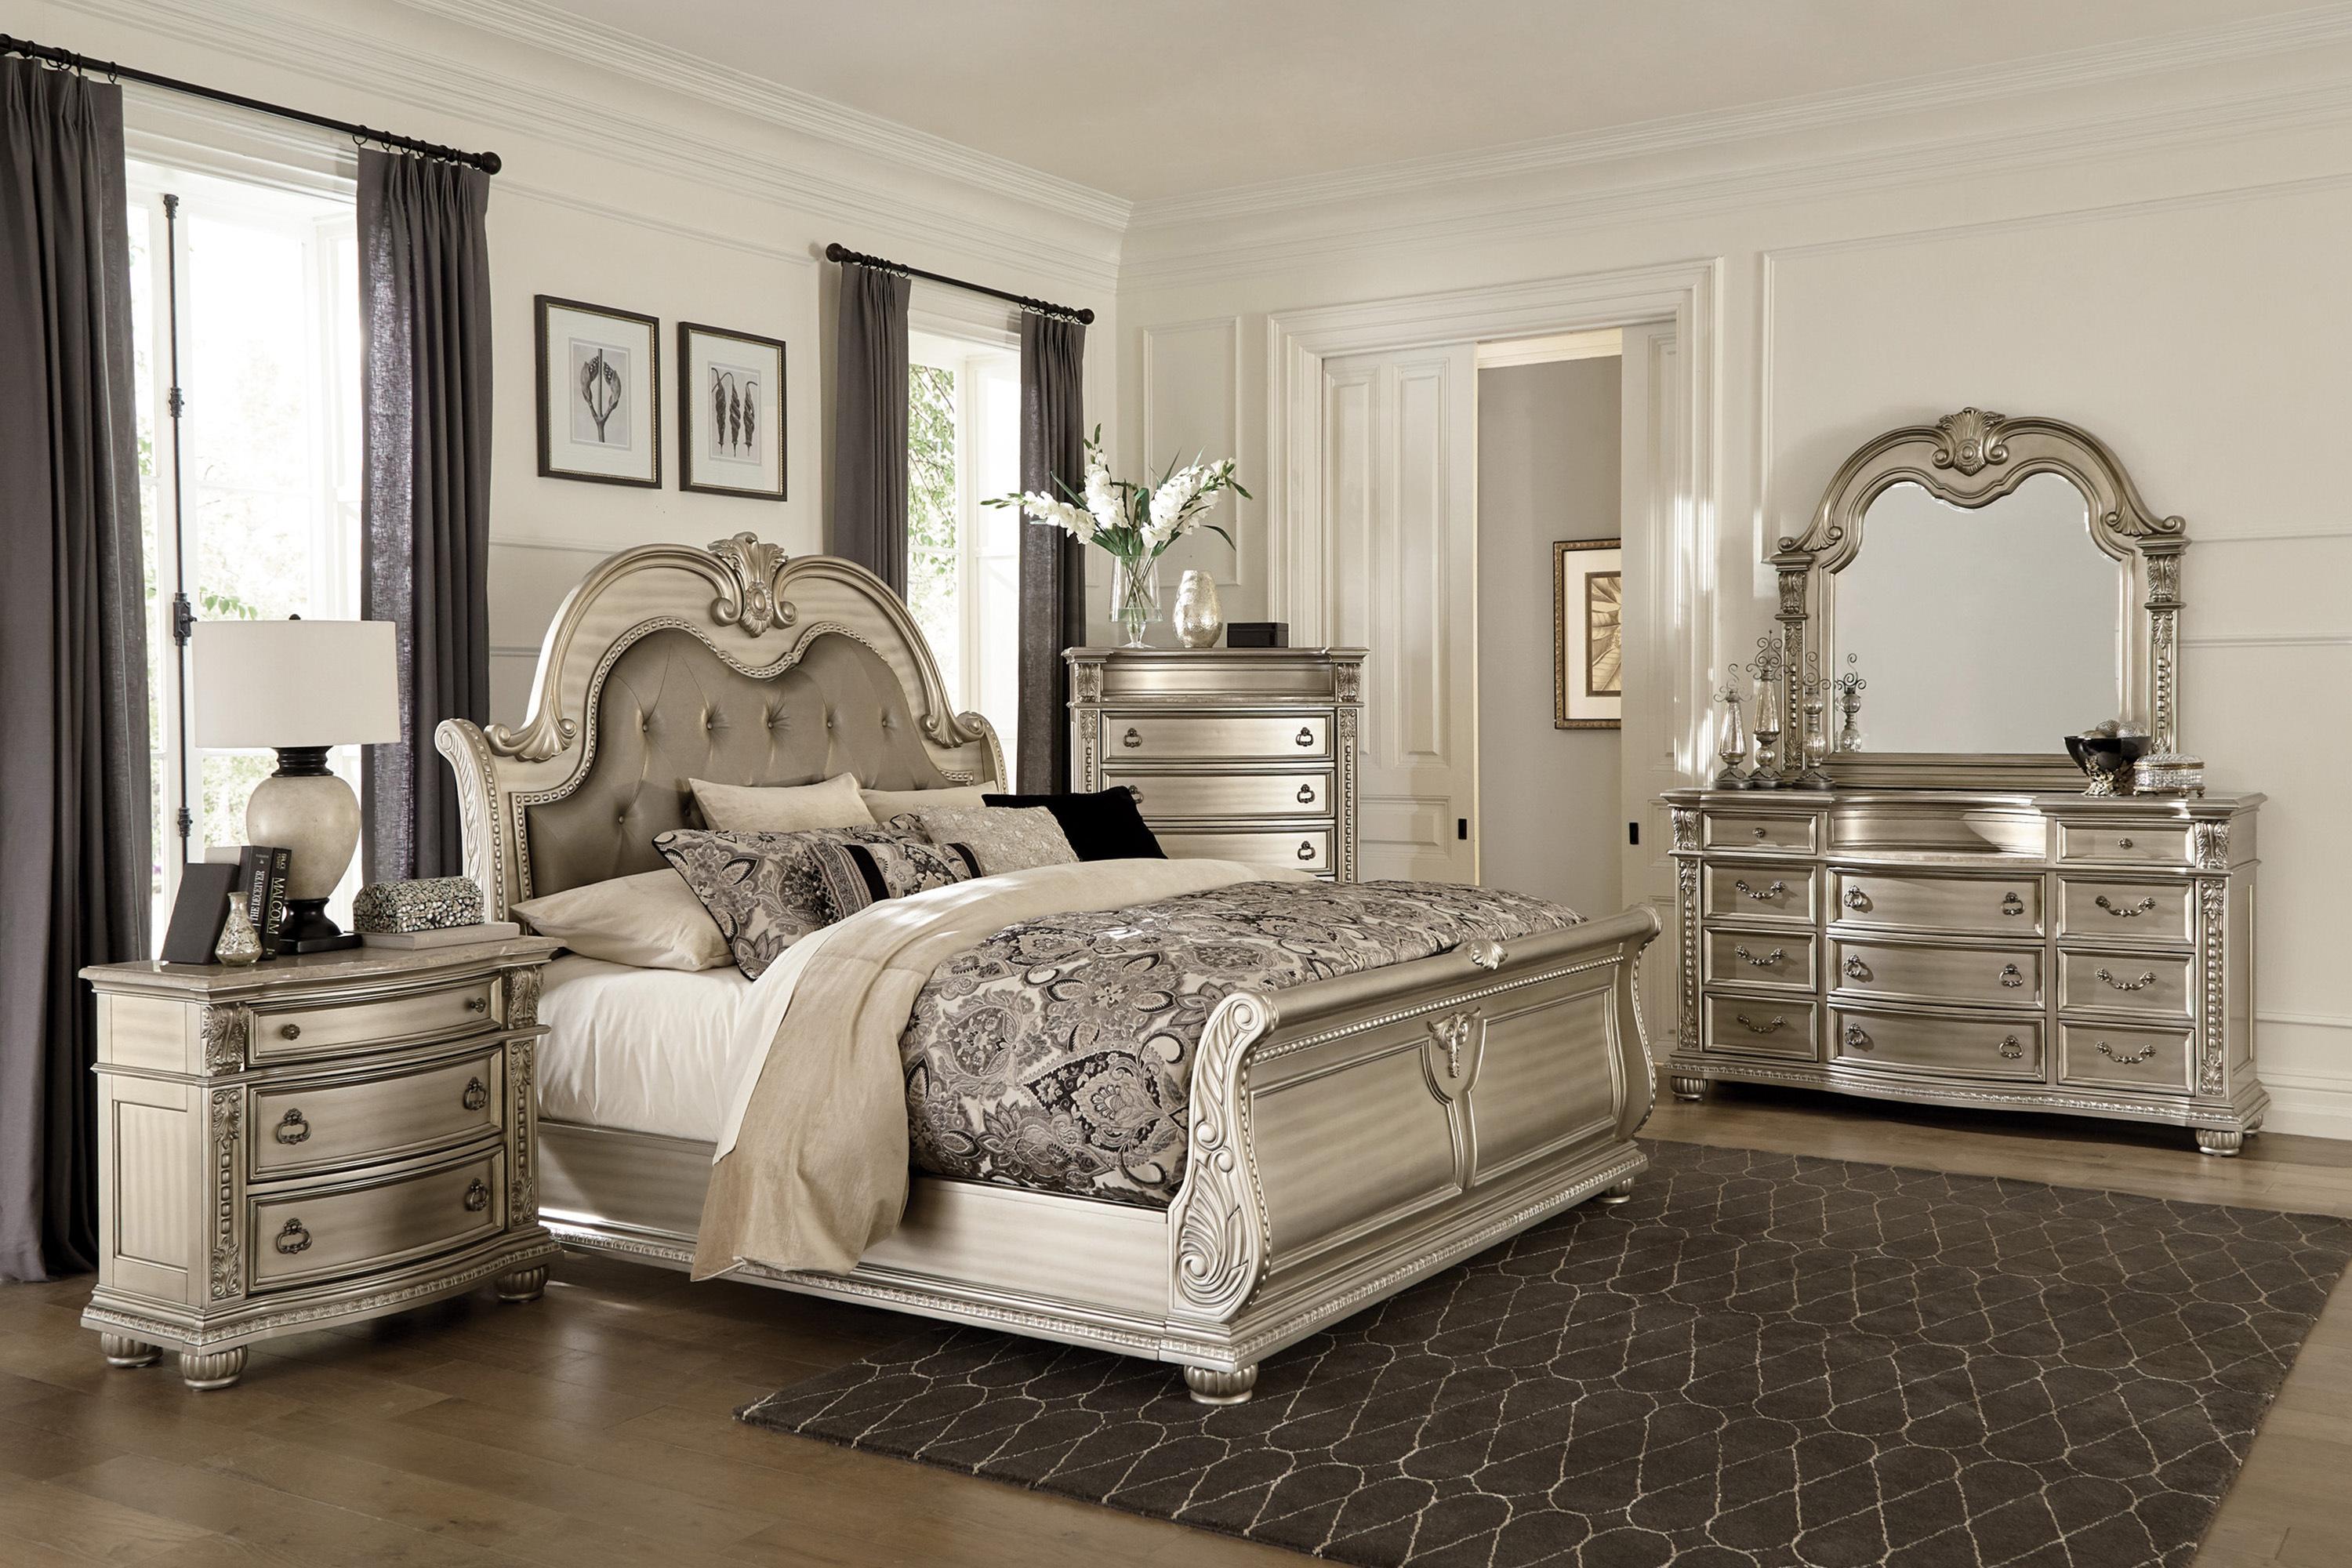 Classic Bedroom Set 1757SV-1-5PC Cavalier 1757SV-1-5PC in Silver Faux Leather